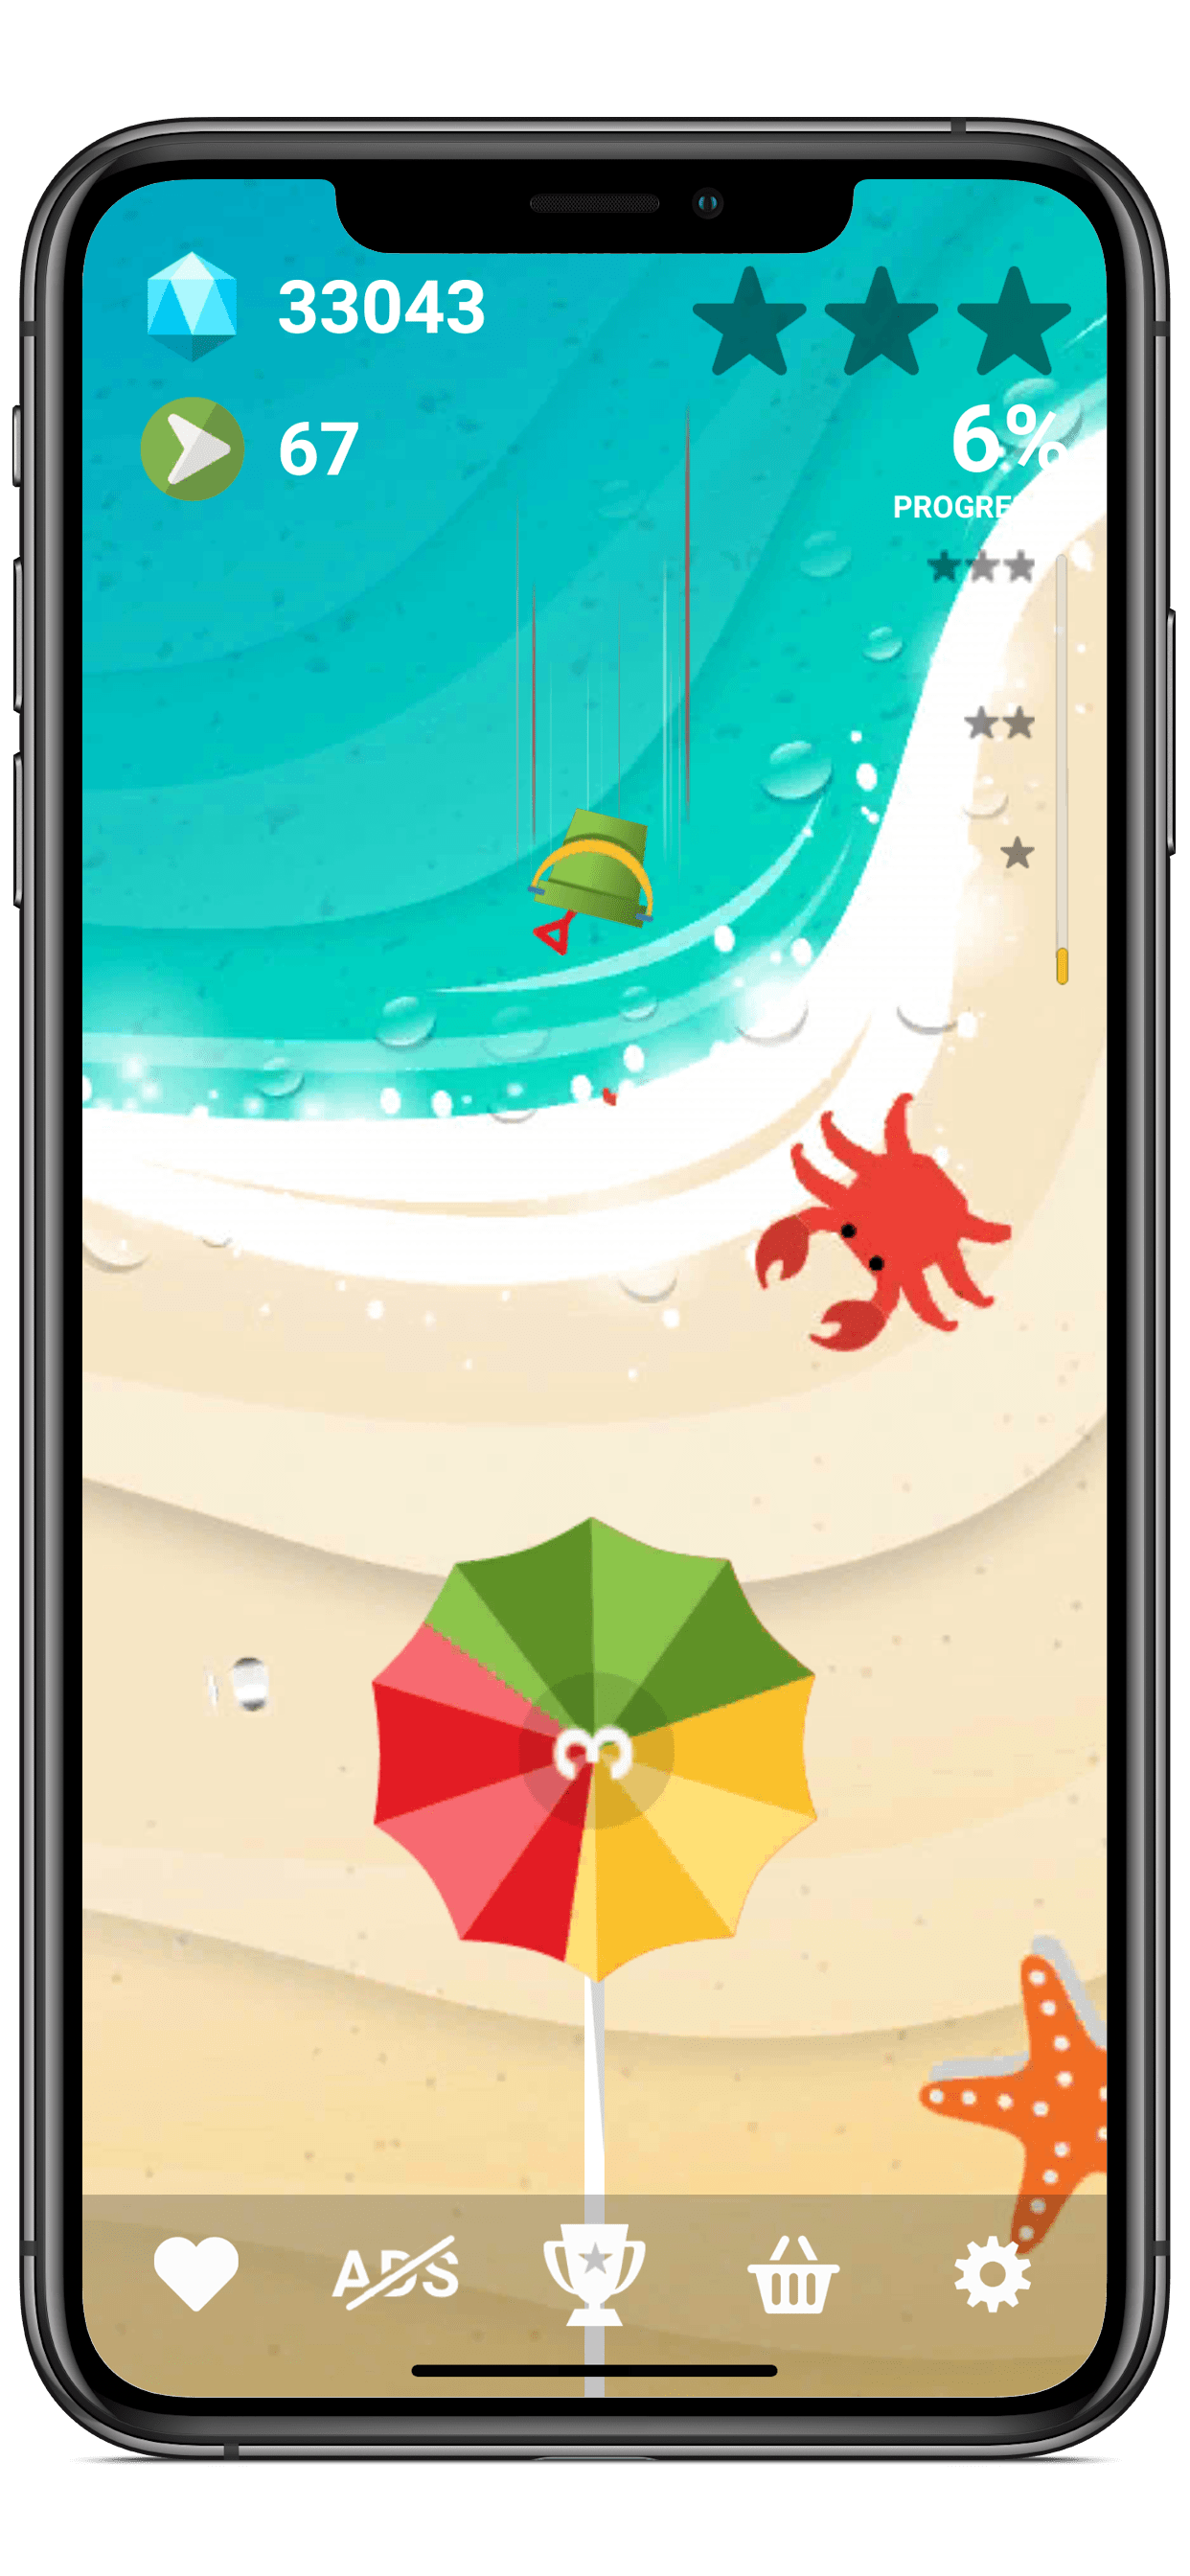 5 11 SWIRLY free game for Android, iOS, Windows - drop and match things, save farm animals, destroy planets, feel like on the beach